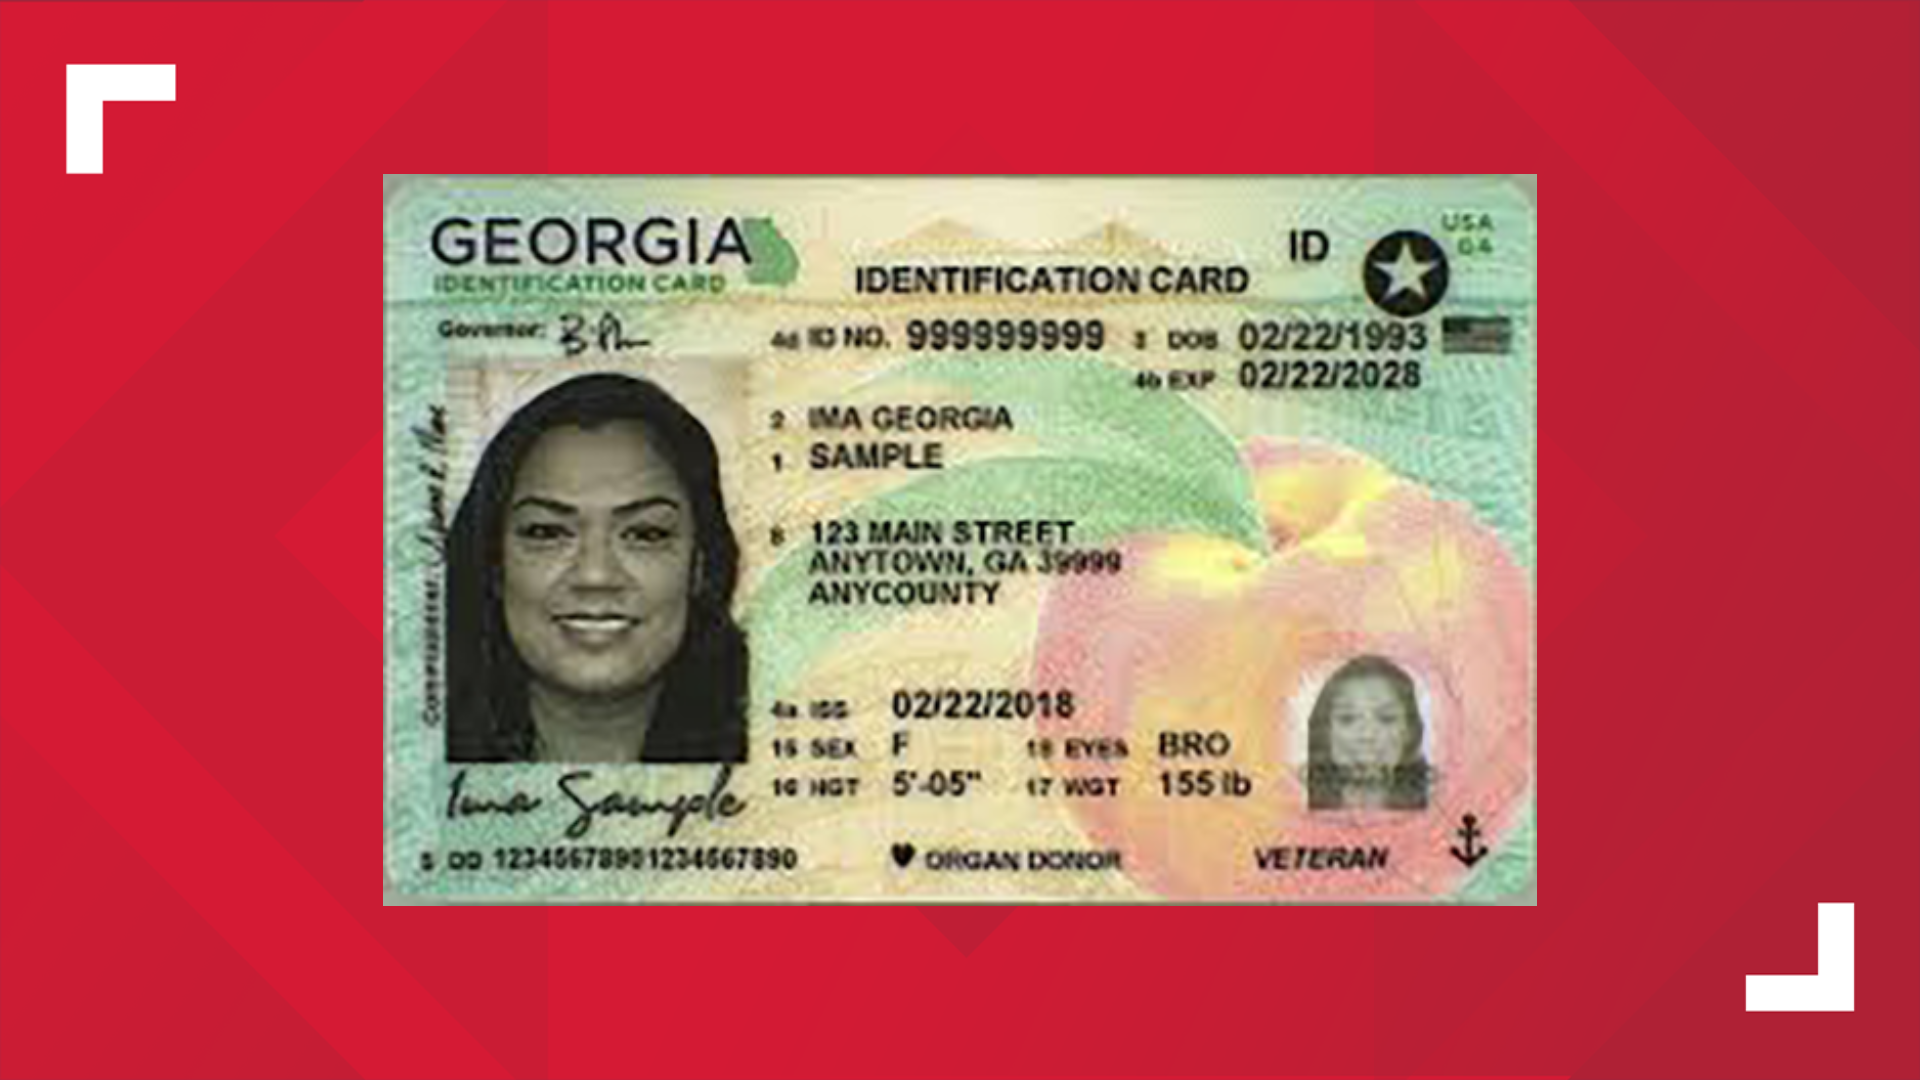 Currently, state-issued photo ID cards can be obtained from the Department of Driver Services for $32.